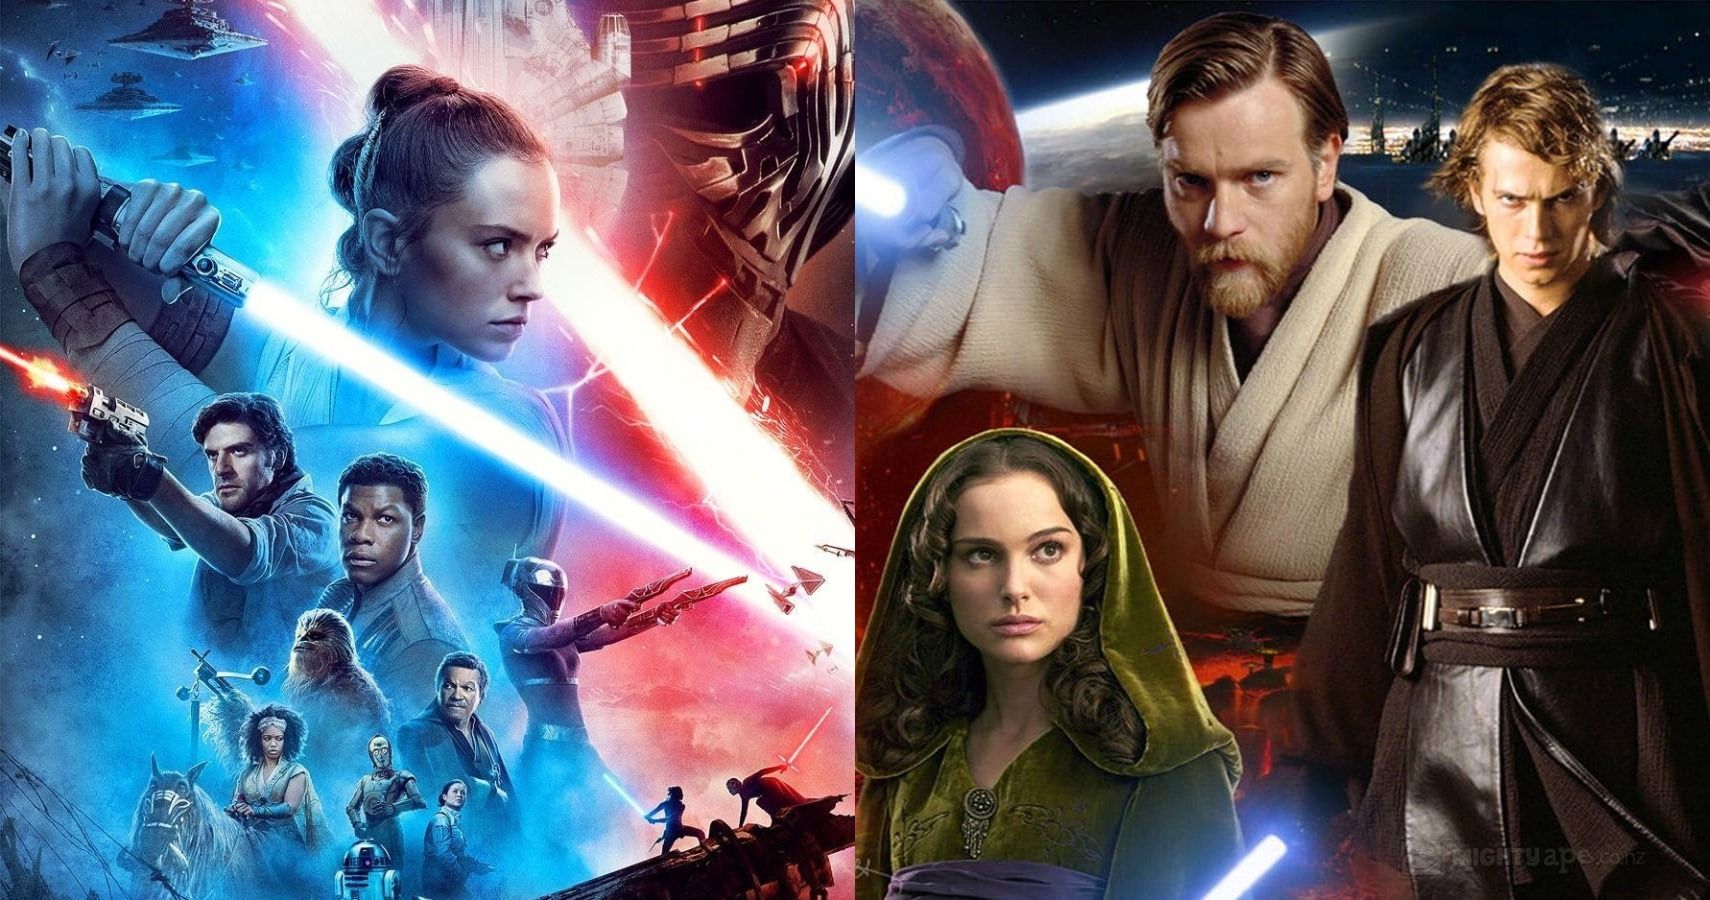 Star Wars The Rise of Skywalker 10 Prequel Storylines That Were Never Resolved